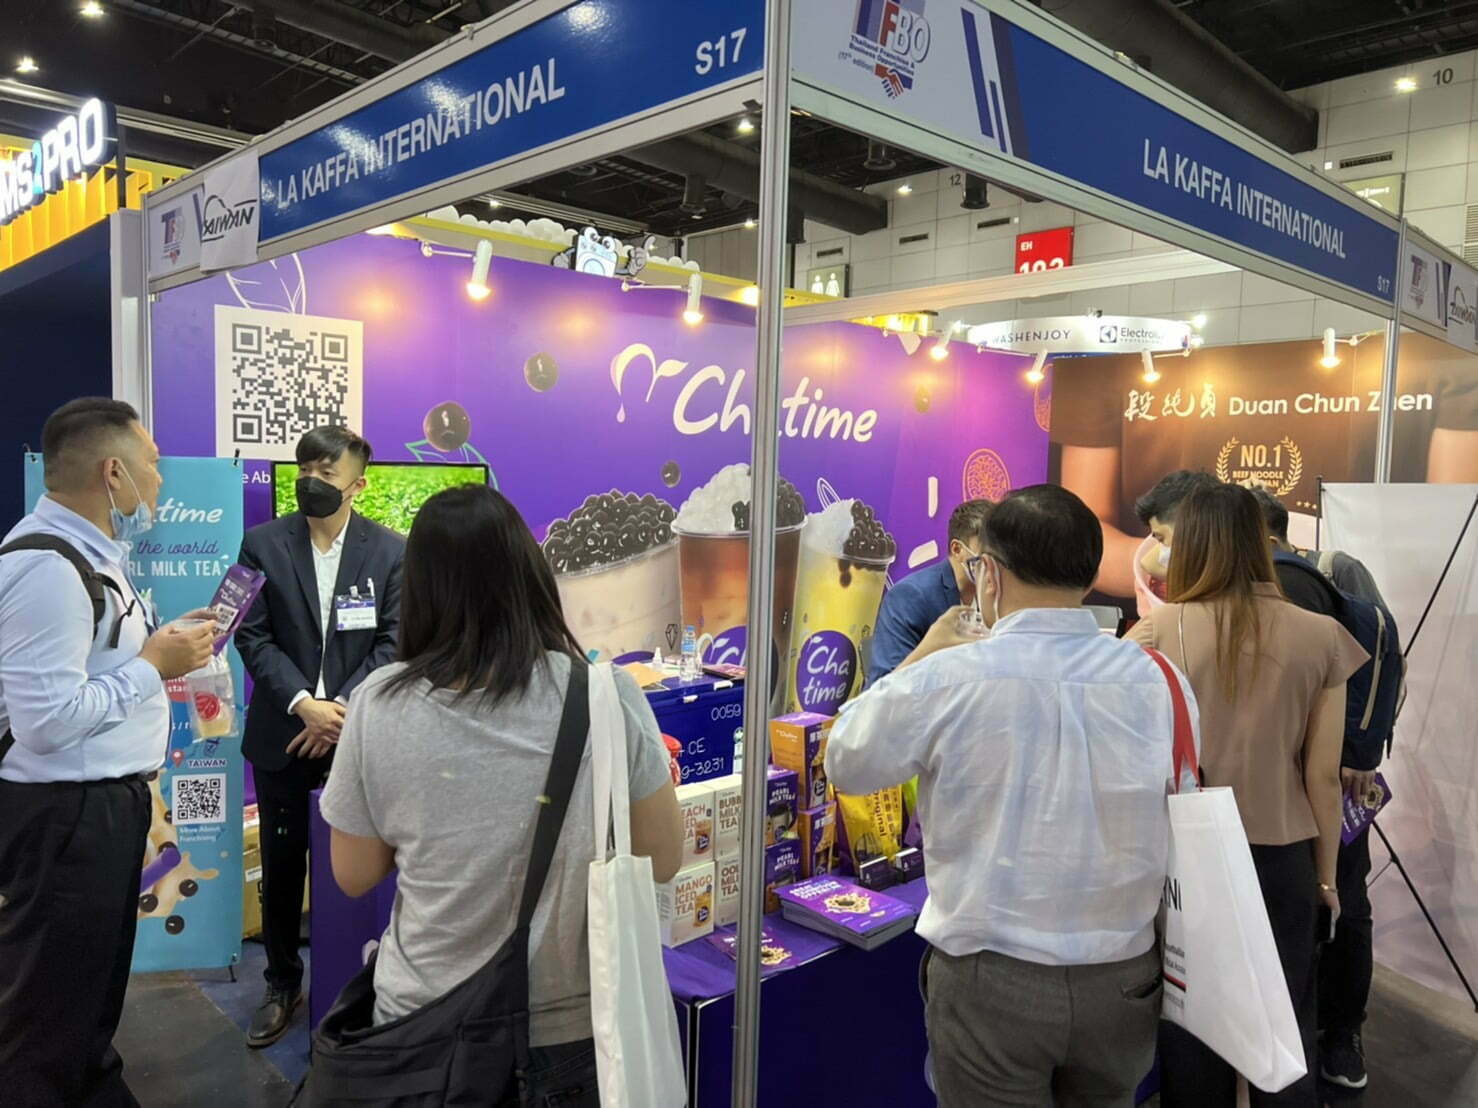 people are interested in Chatime & Duan Chua Zhen at Thailand's franchising show